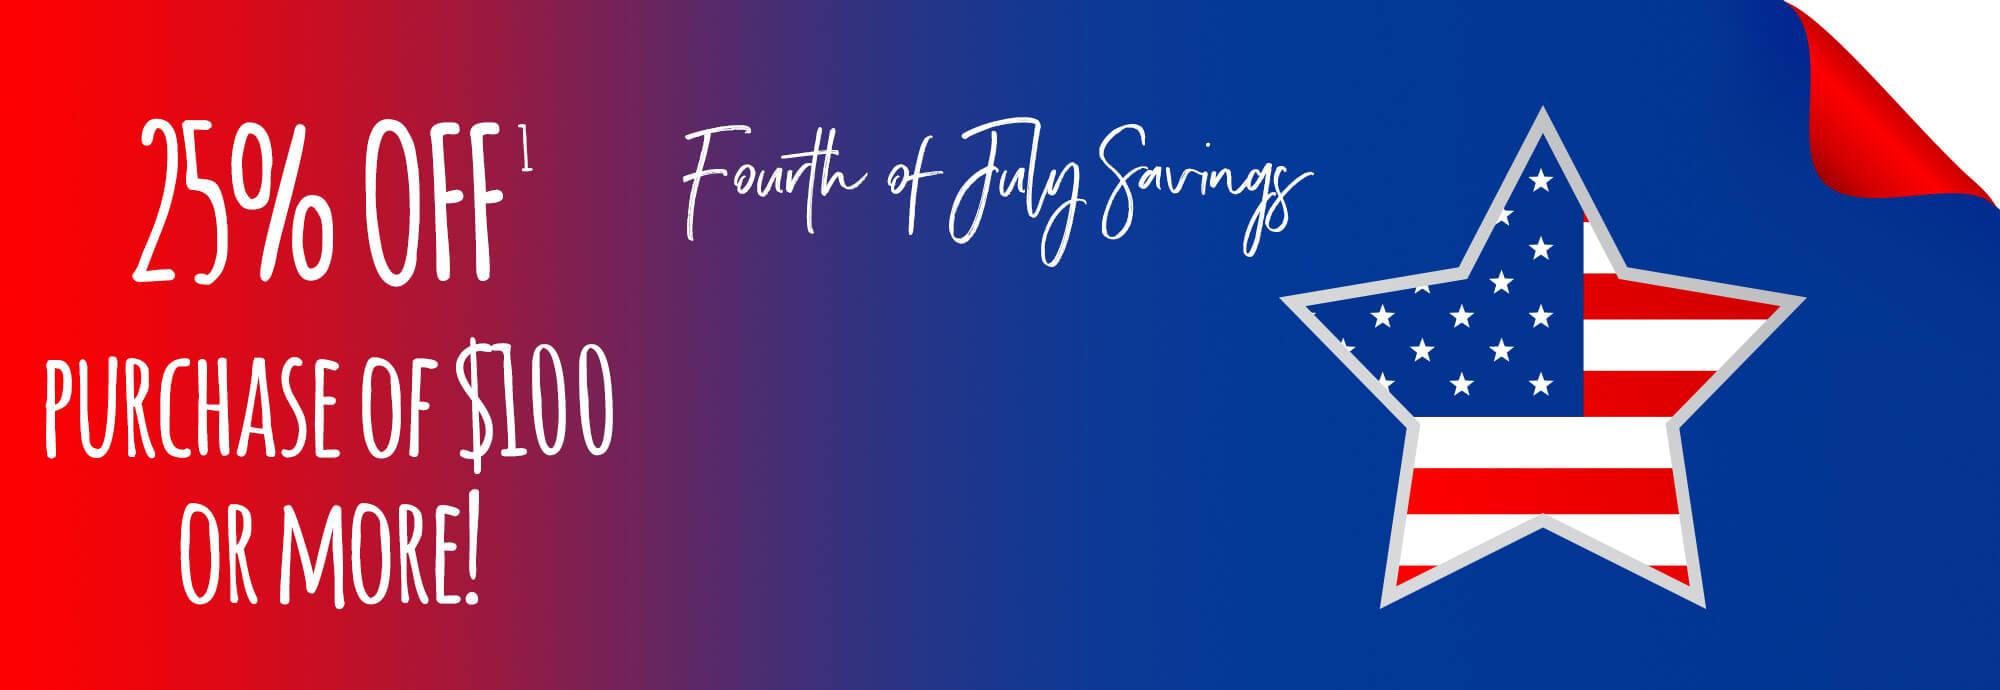 Fourth of July Savings: 25% OFF purchase of $100 or more!